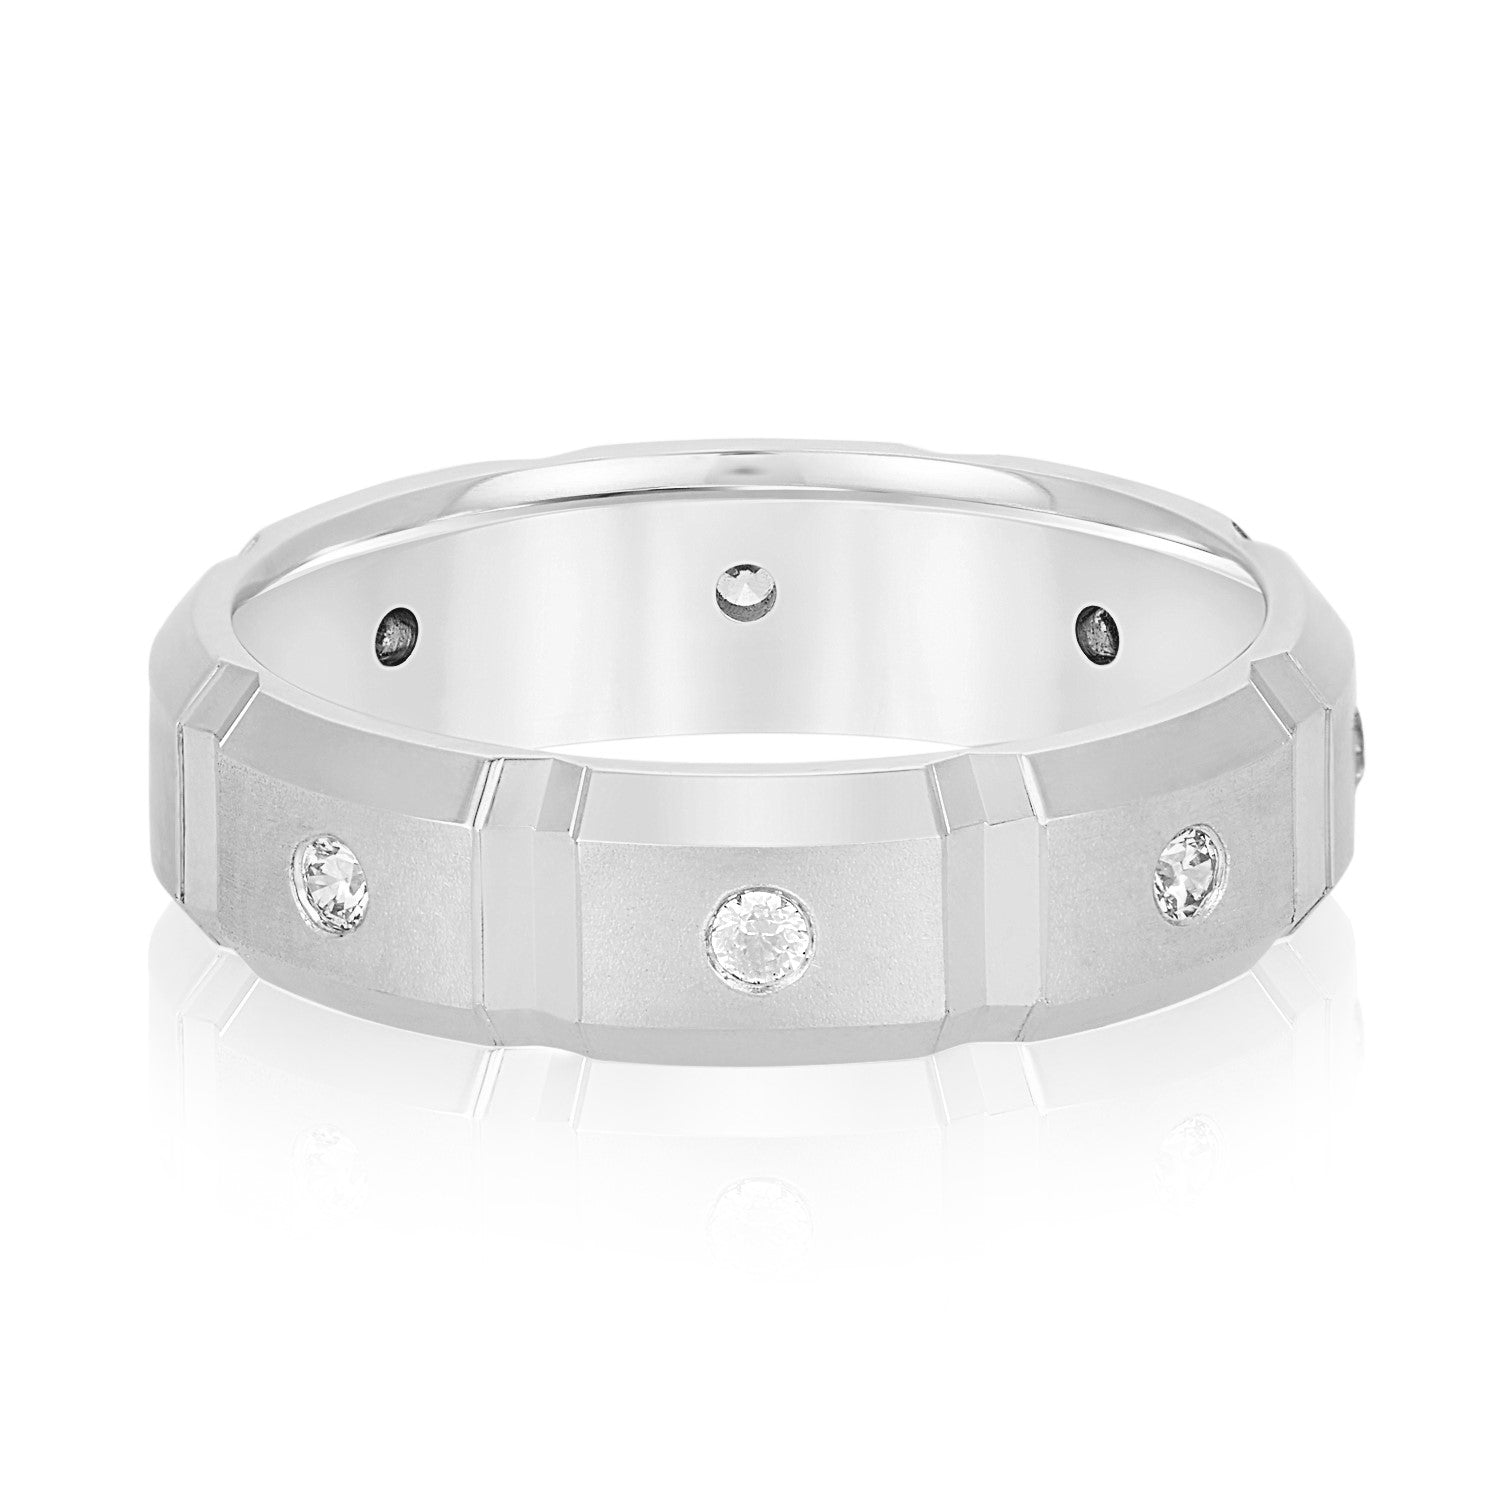 Men's Squared Accented Diamond Wedding Band With Beveled Edges